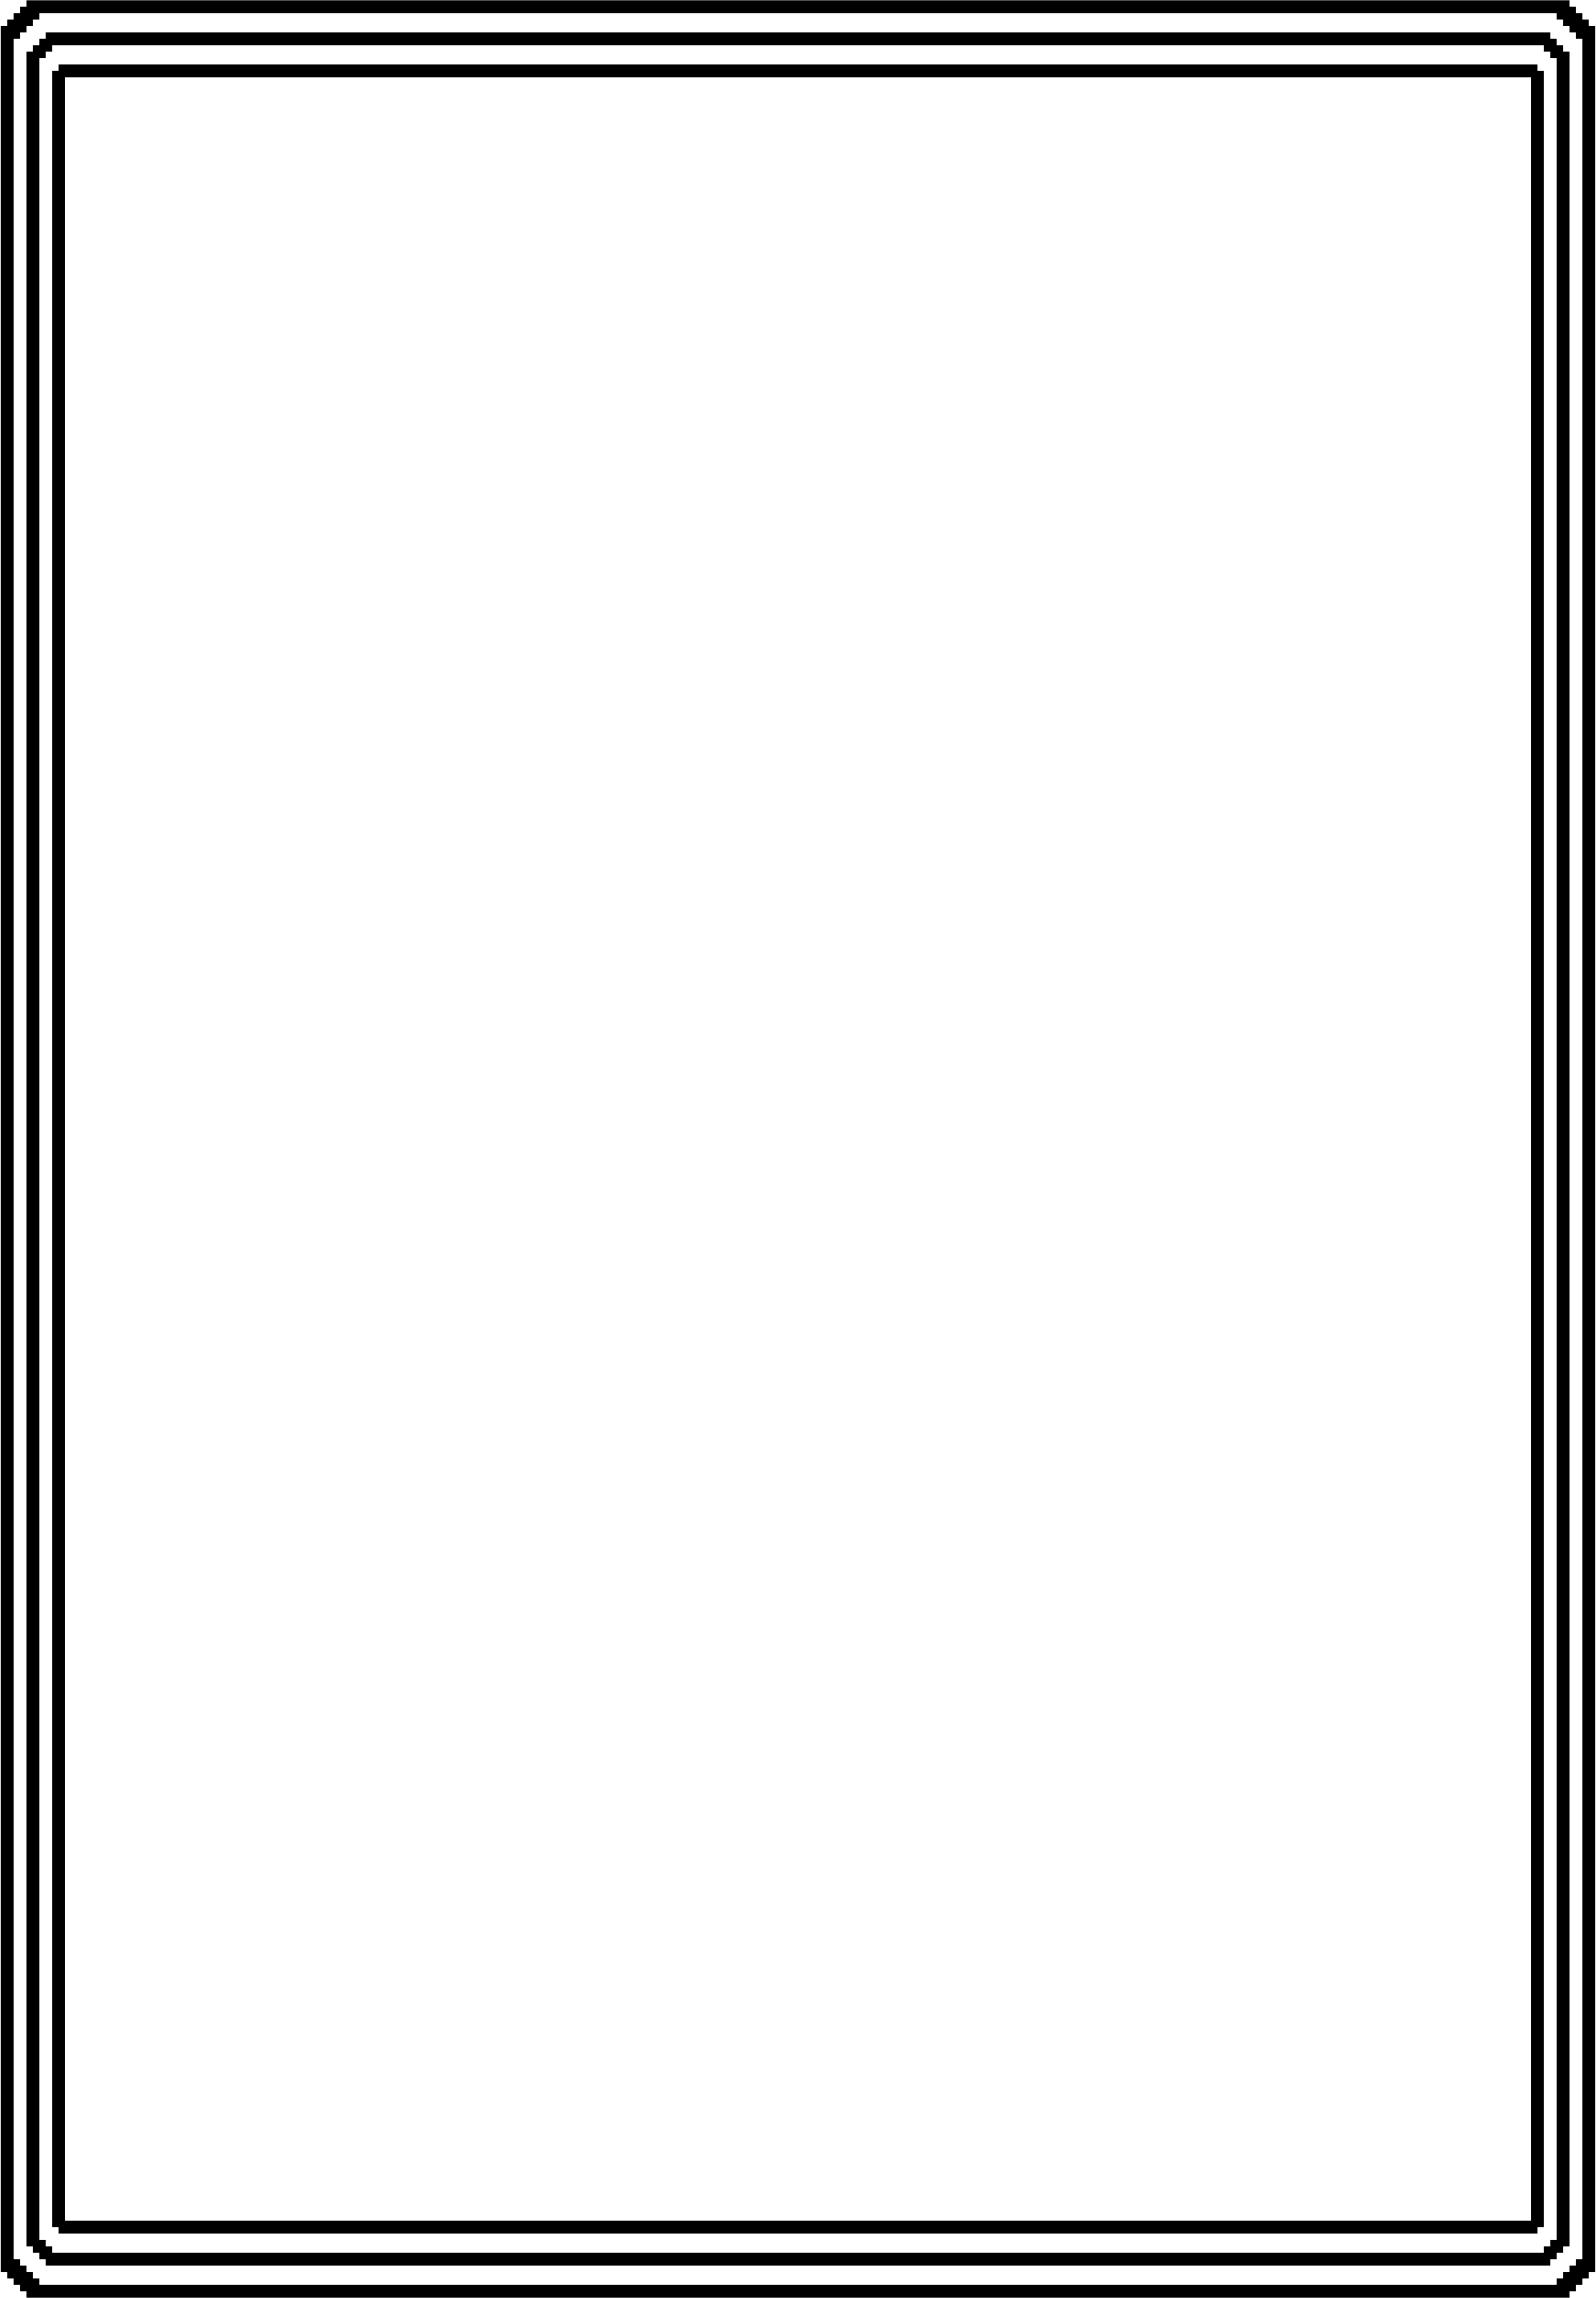 Border 63 (A4 size) png